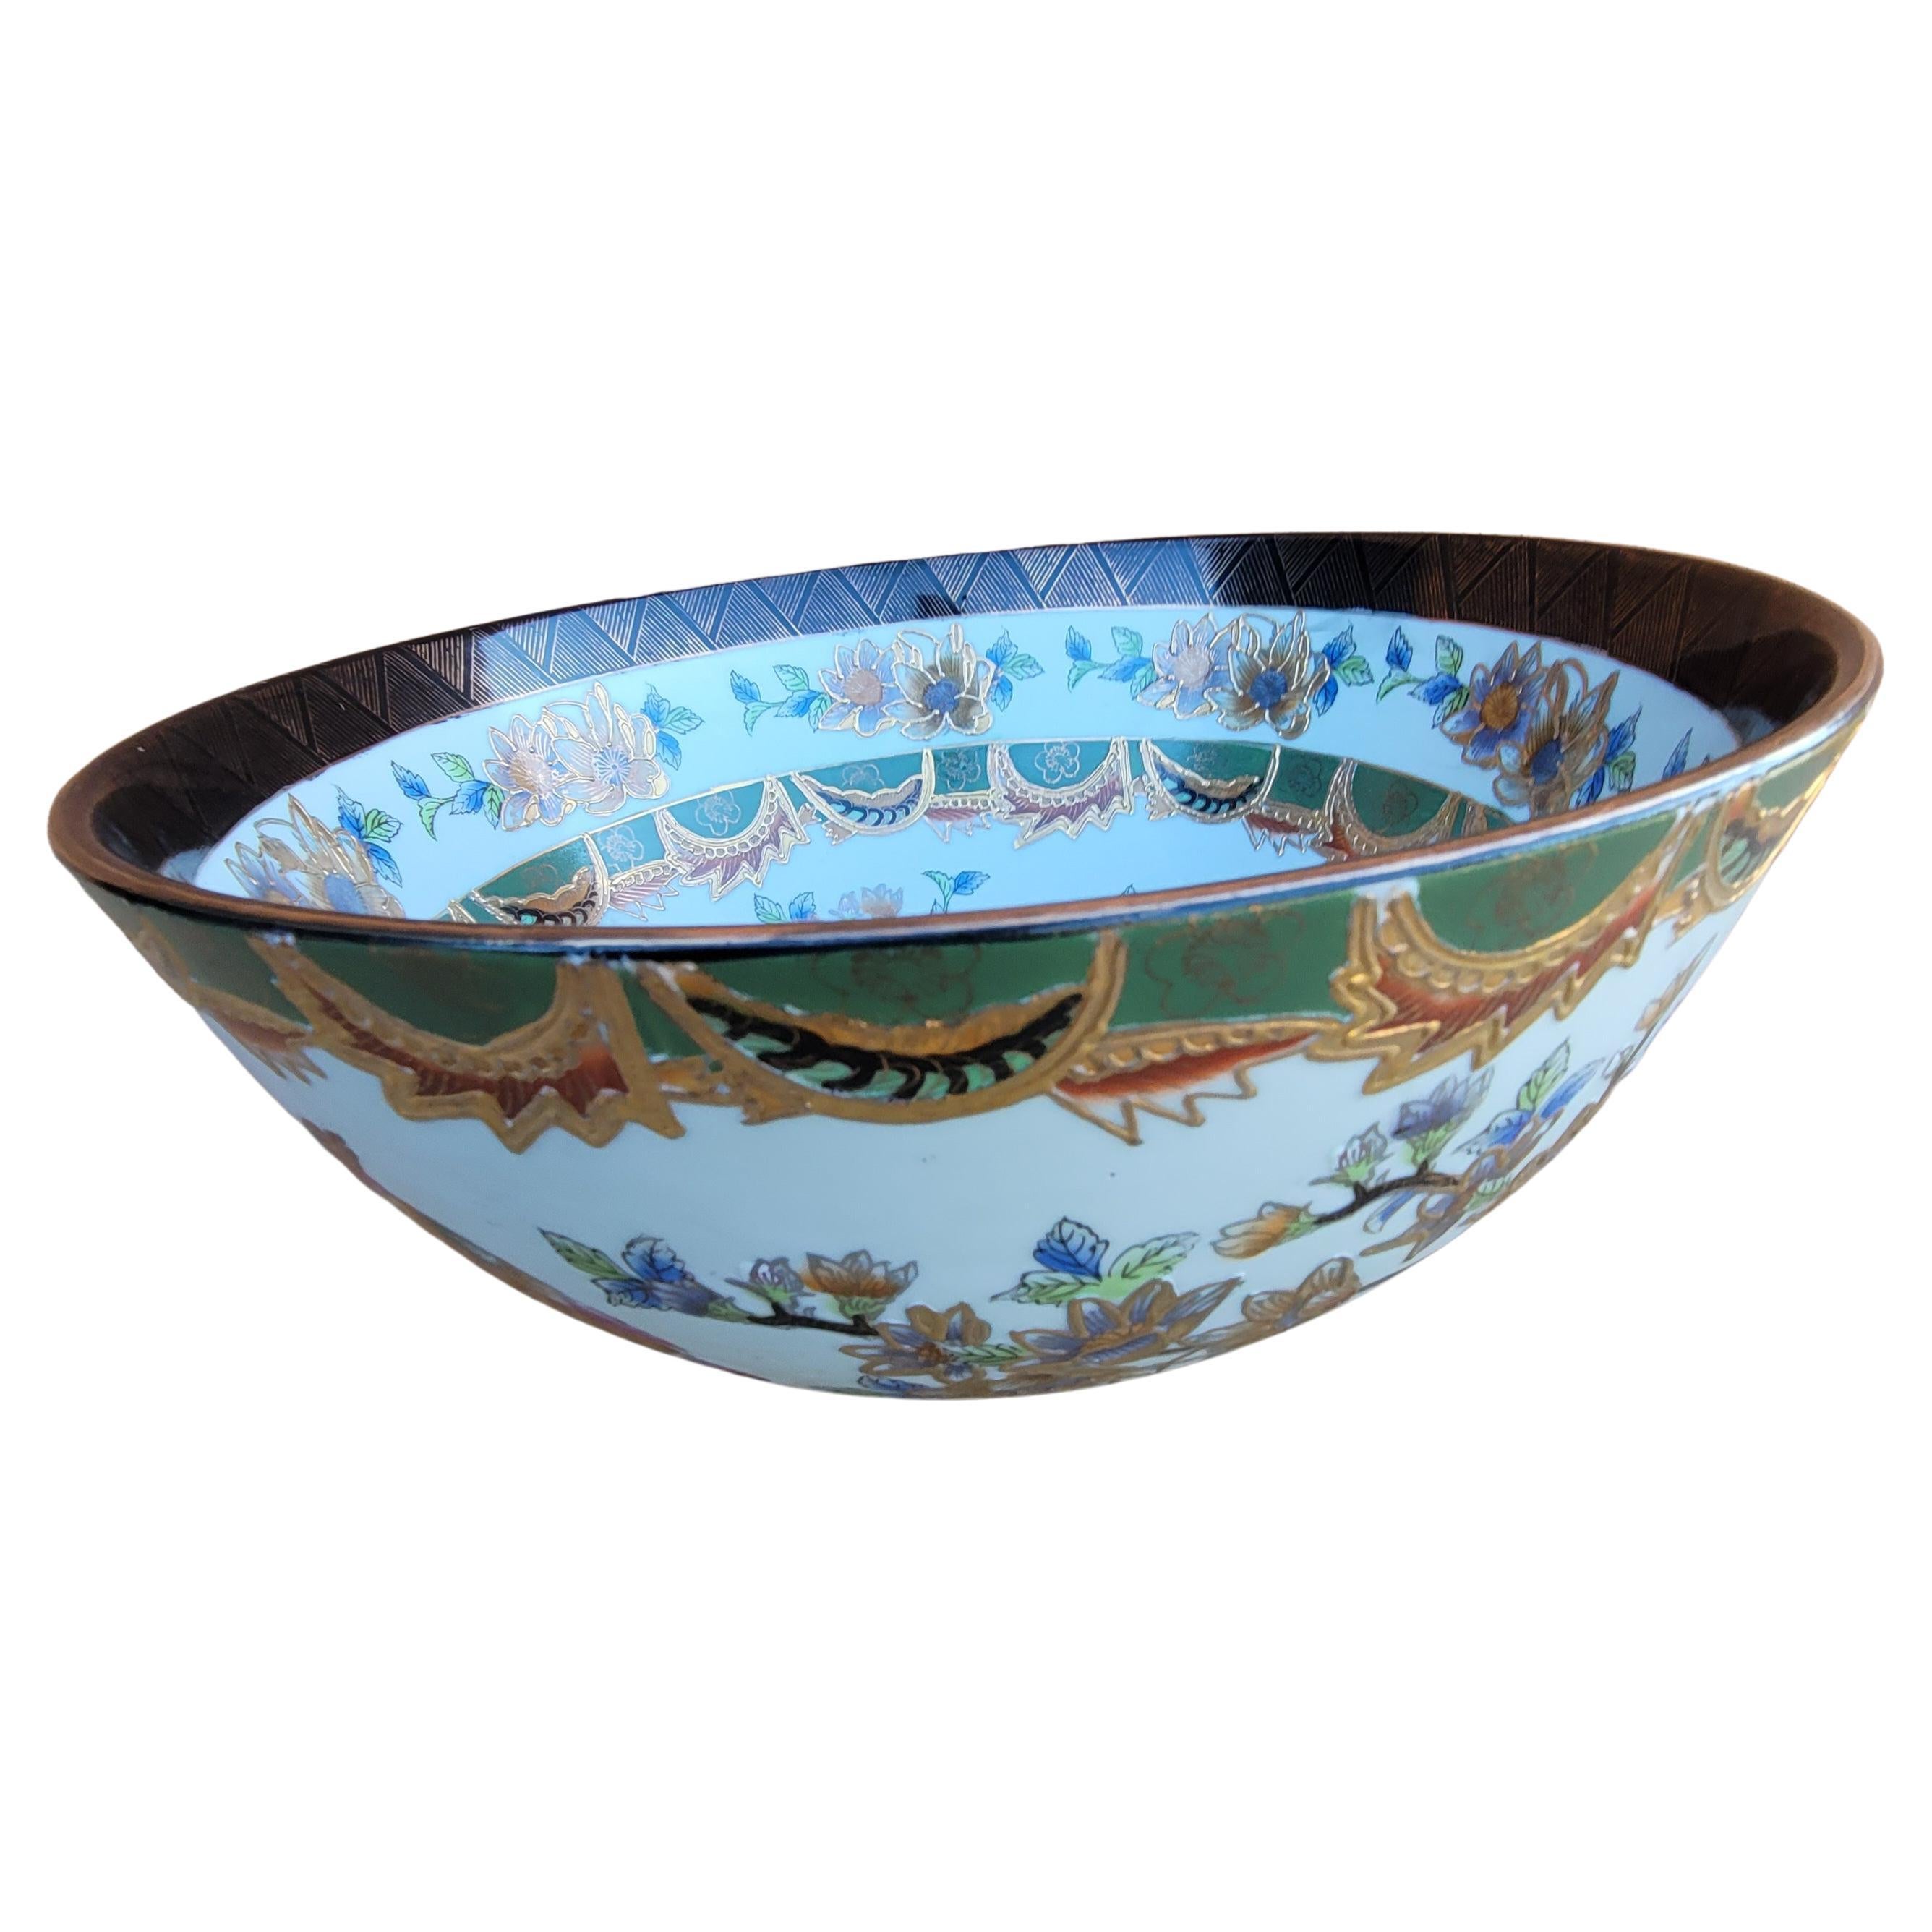 Enameled Large Hand-Painted Chinese Enamel And Gilt Decorated Porcelain Bowl For Sale